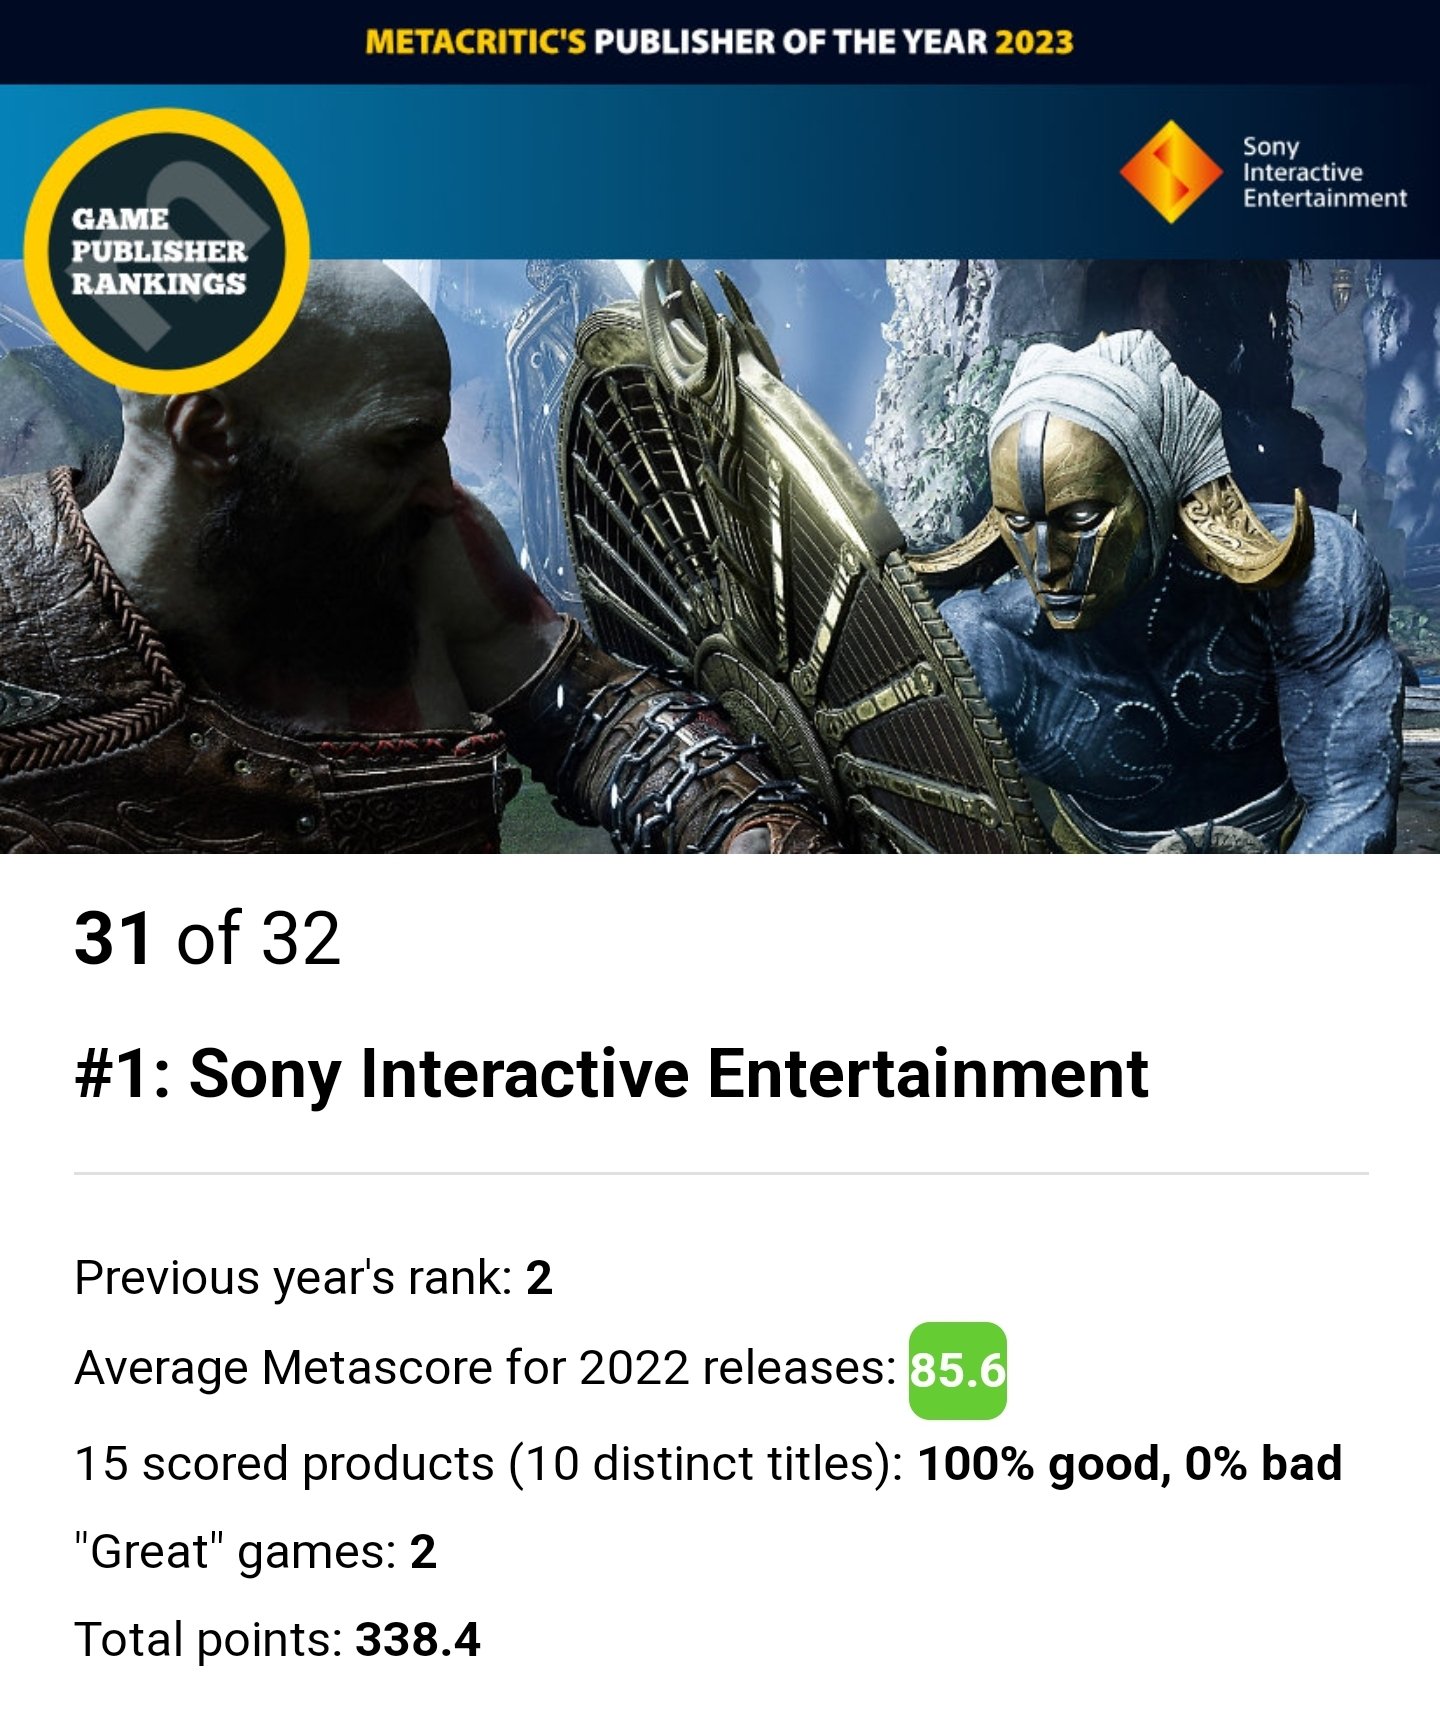 metacritic on X: The 40 Best Console-Exclusive Games of This